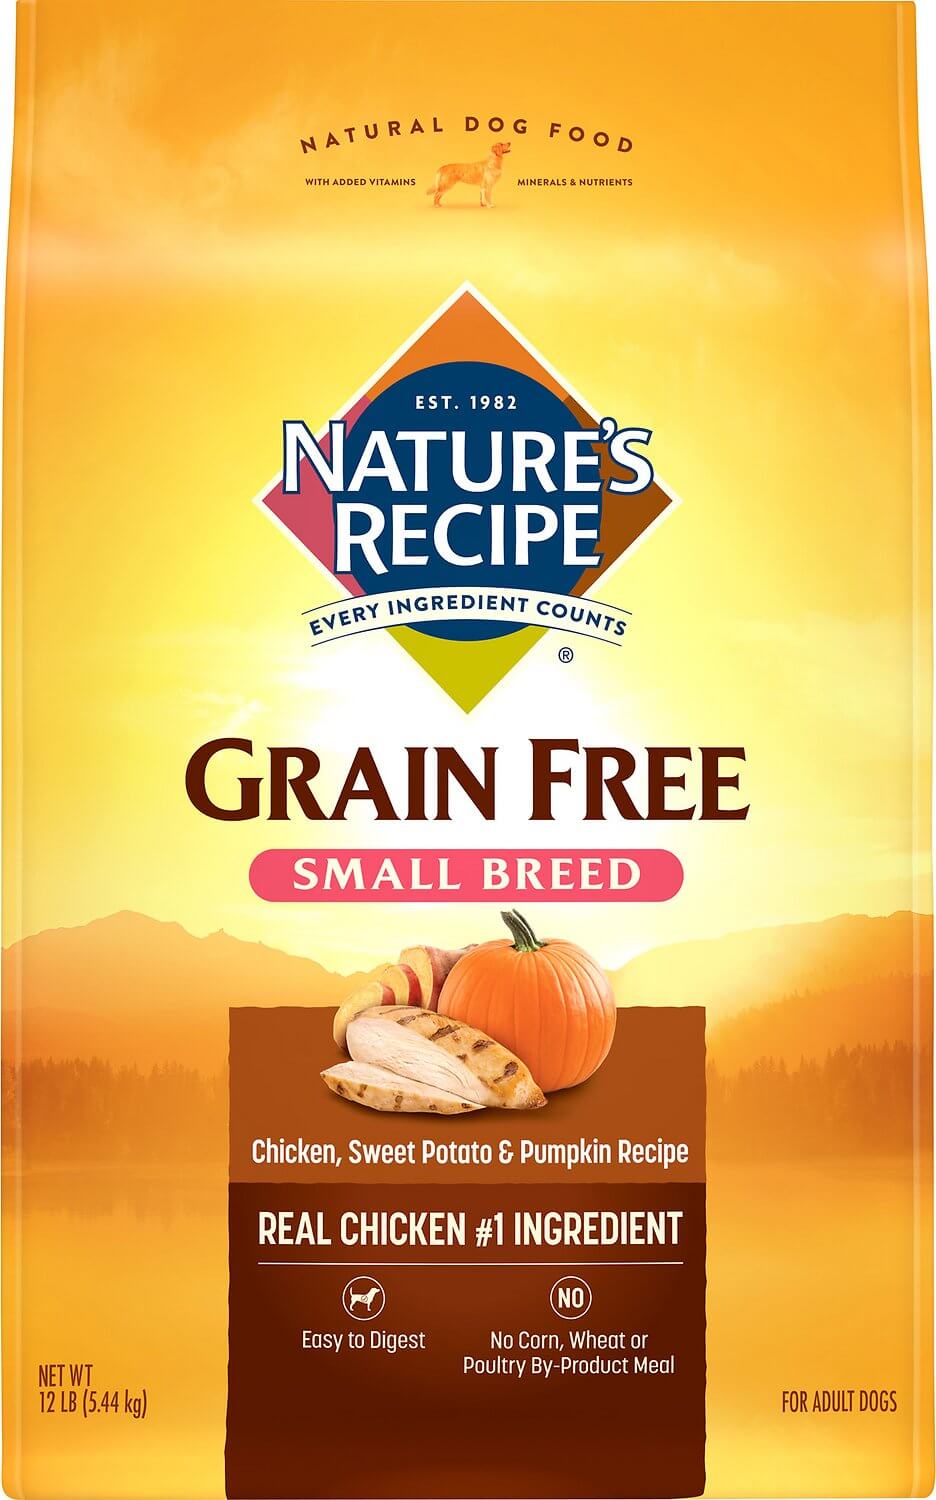 Nature’s Recipe Grain-Free Dog Food Review (Dry)